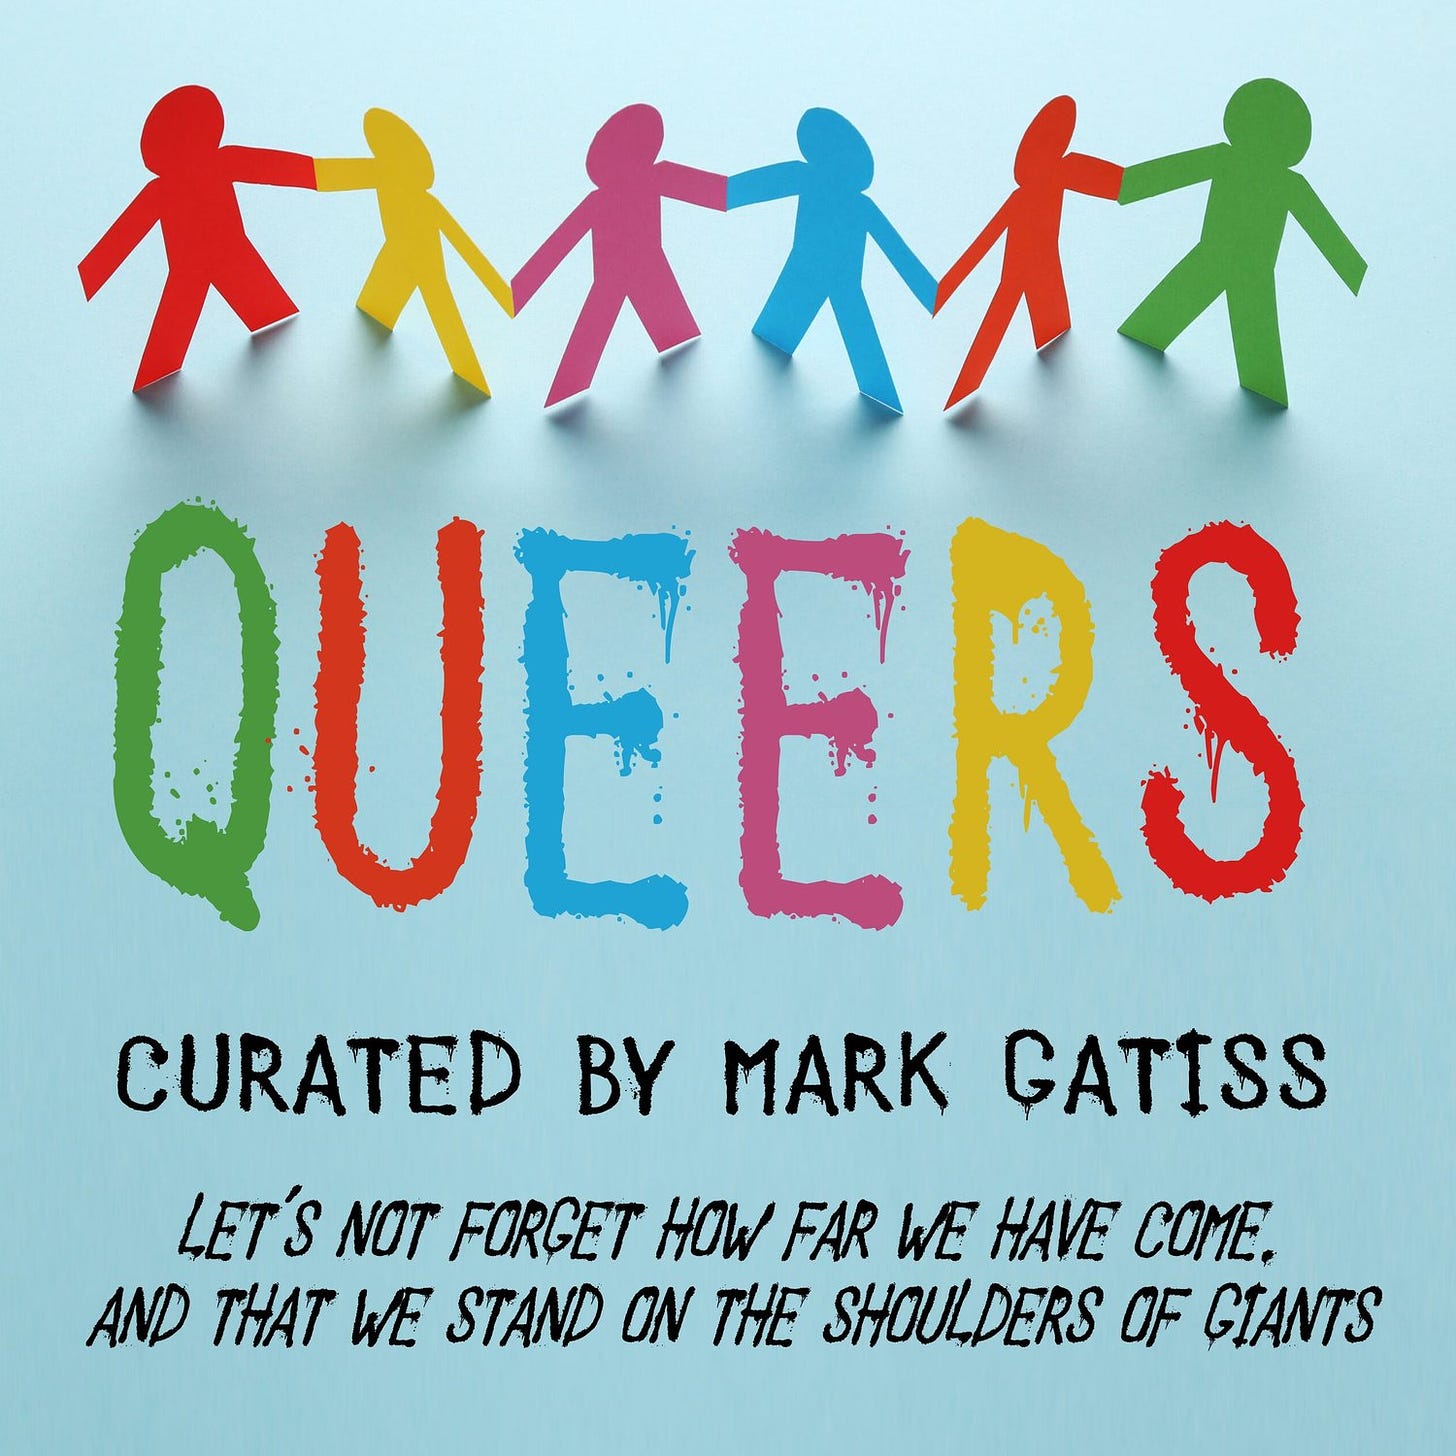 Multicoloured paper figures against a light blue background, with the word Queers in rainbow coloured paint. Curated by Mark Gatiss. Let's not forget how far we have come, and that we stand on the shoulders of giants.